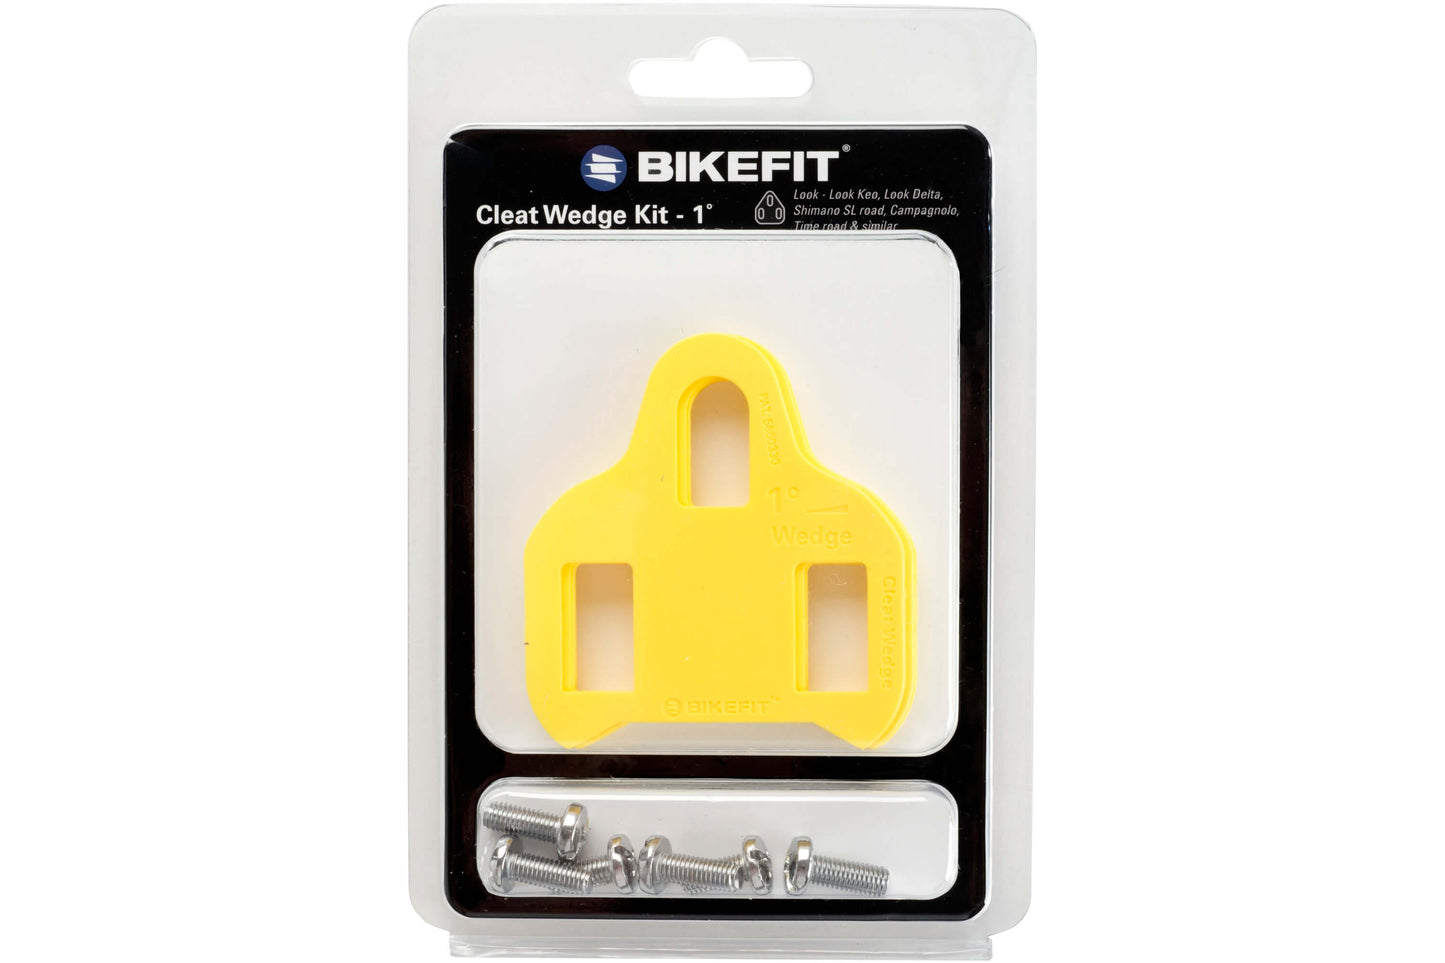 BikeFit Cleat Wedge Kit - Cleat Wedge - LOOK/Shimano Compatible, Shown in Packaging